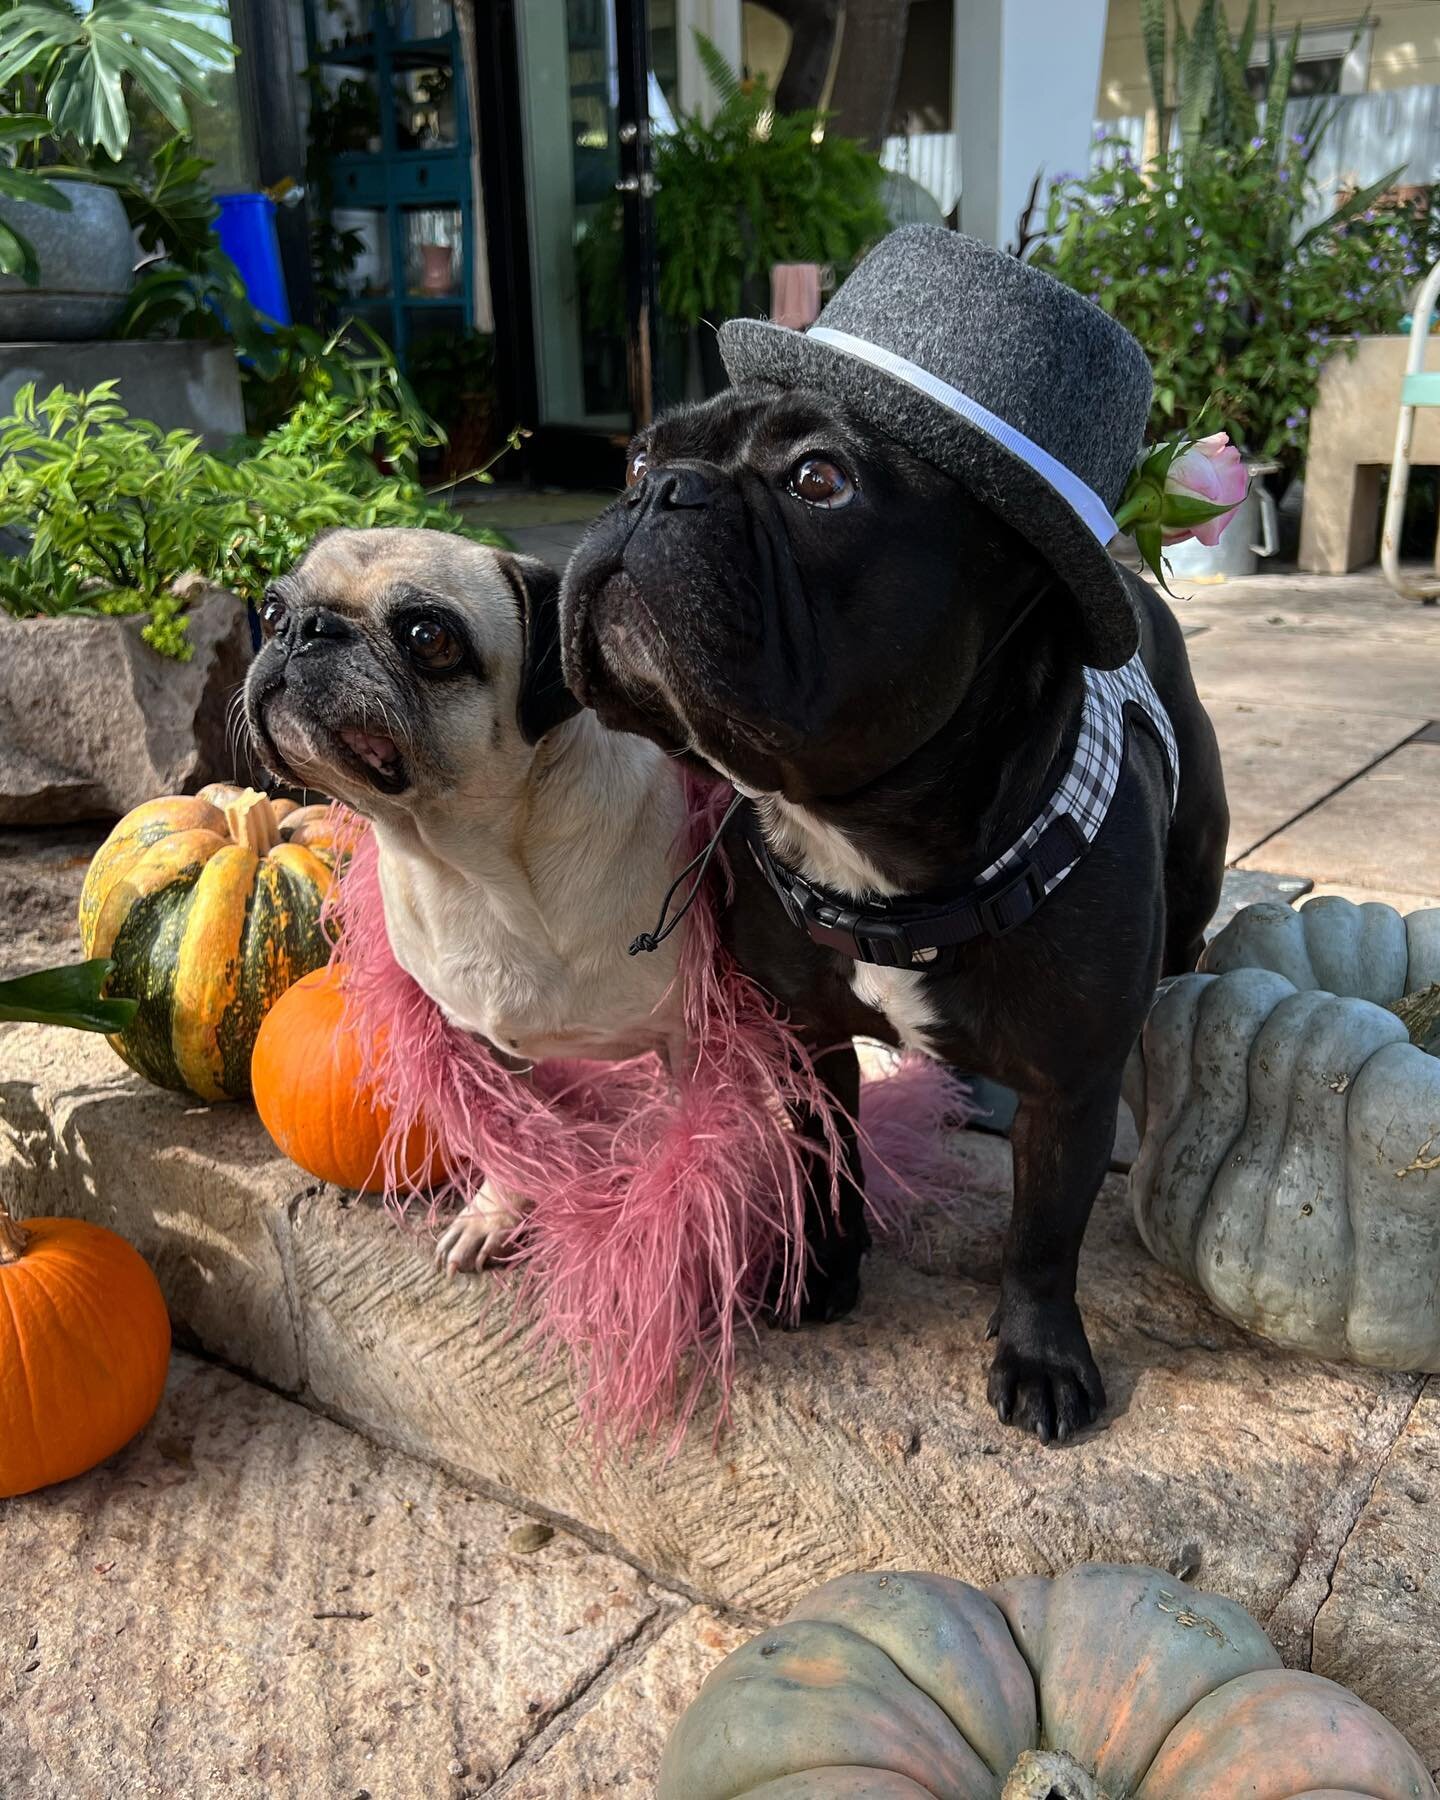 Louis and Apple are dressed in their finest garments to wish y&rsquo;all a very happy Halloween from @1102east 🎃🌷🐶🎩🐾🍁🍂 

#dirtygardner #louisinaustin #1102east #bigredsun #centerpeace #austineventspace #halloween #dressedtoimpress #frenchielov